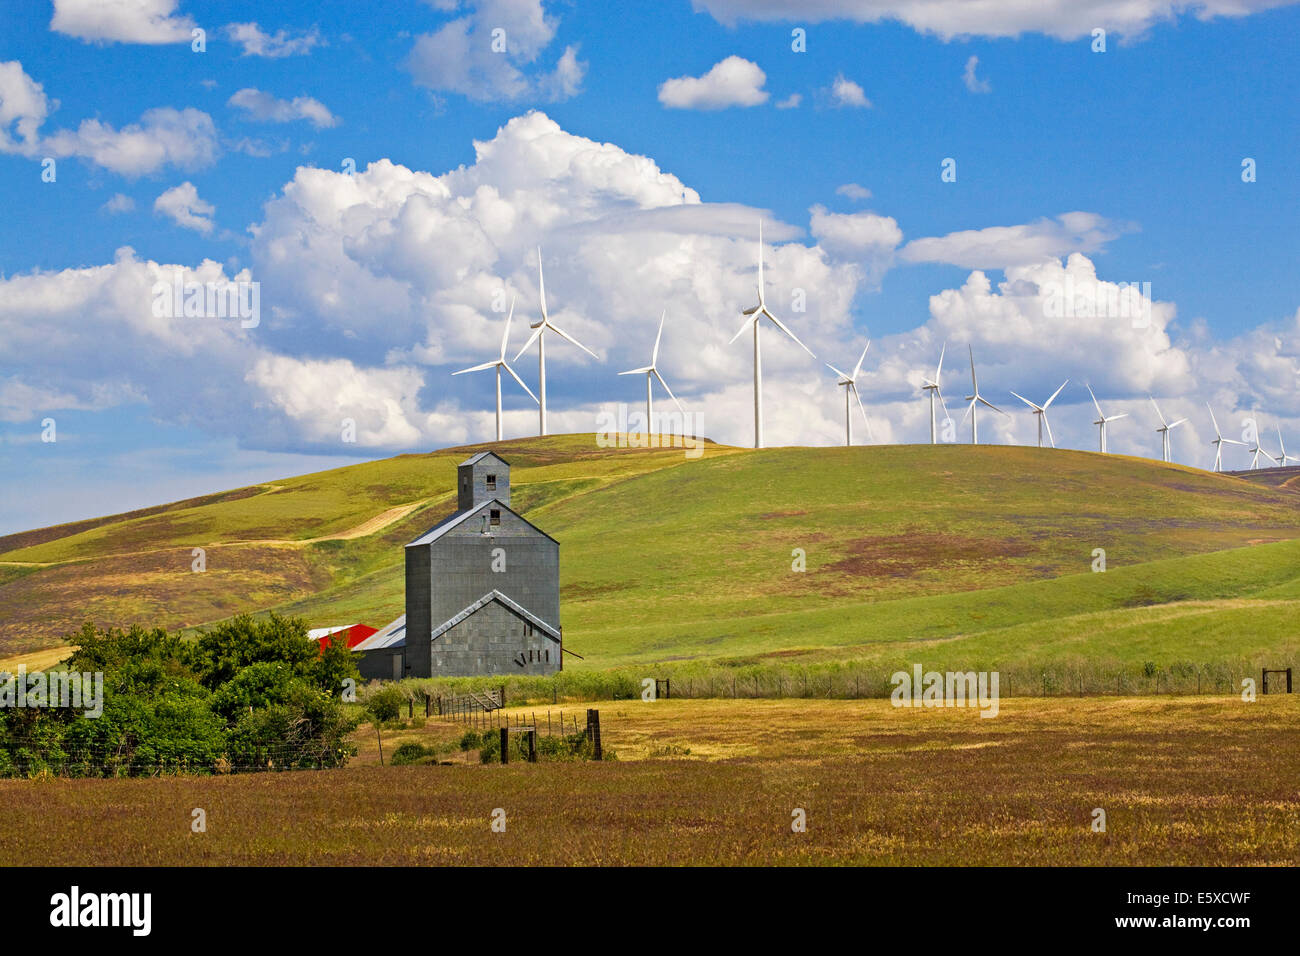 A farm in the remote Palouse Empire region,  a farming and wheat growing region of rolling hills and wide skies in eastern Washington. Stock Photo